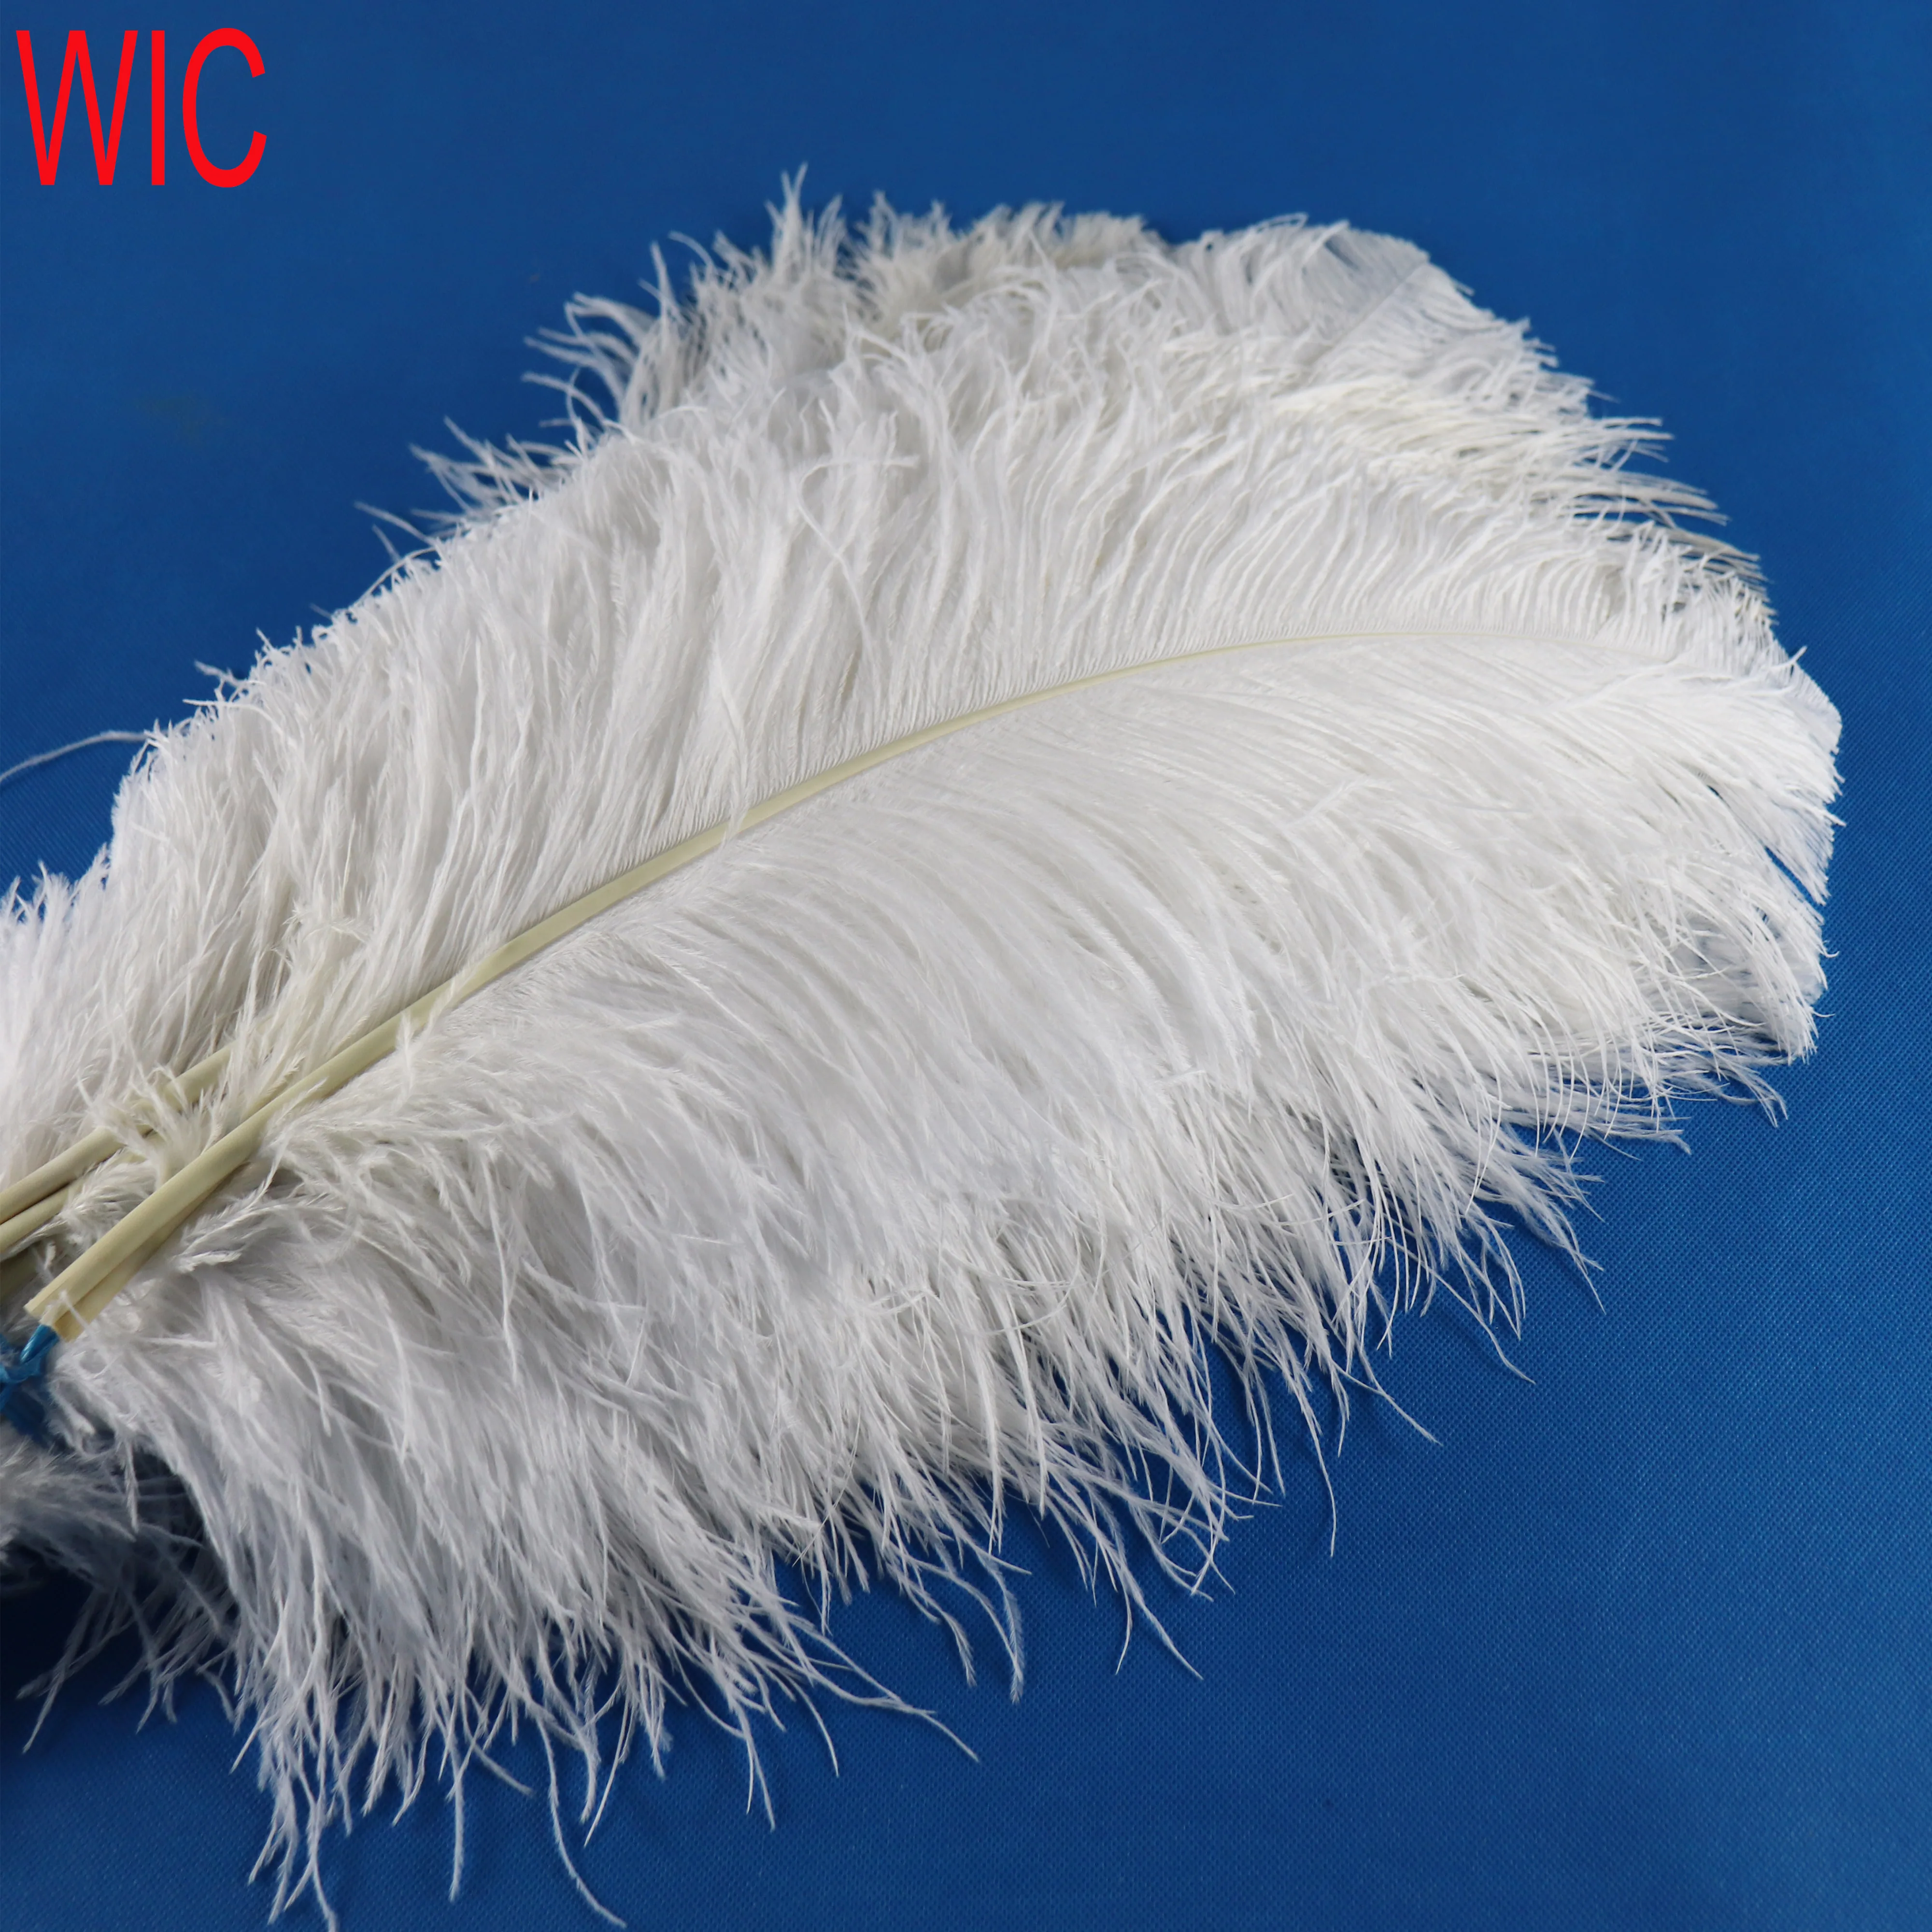 dying ostrich feathers